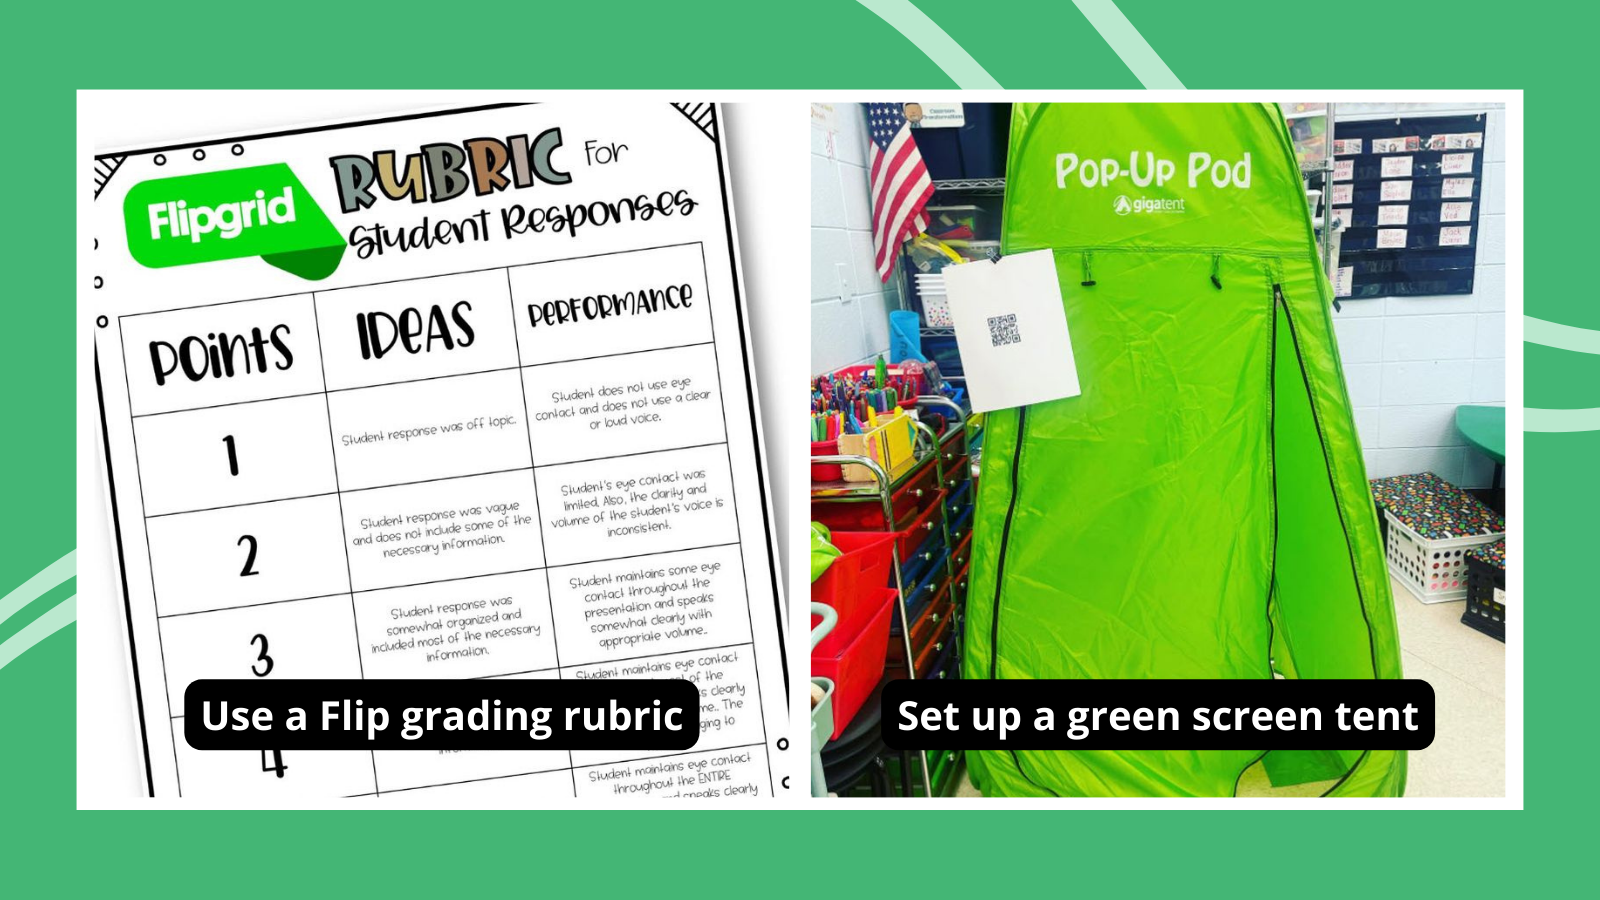 Collage of ideas for using Flip in the classroom, including a grading rubric and green screen tent